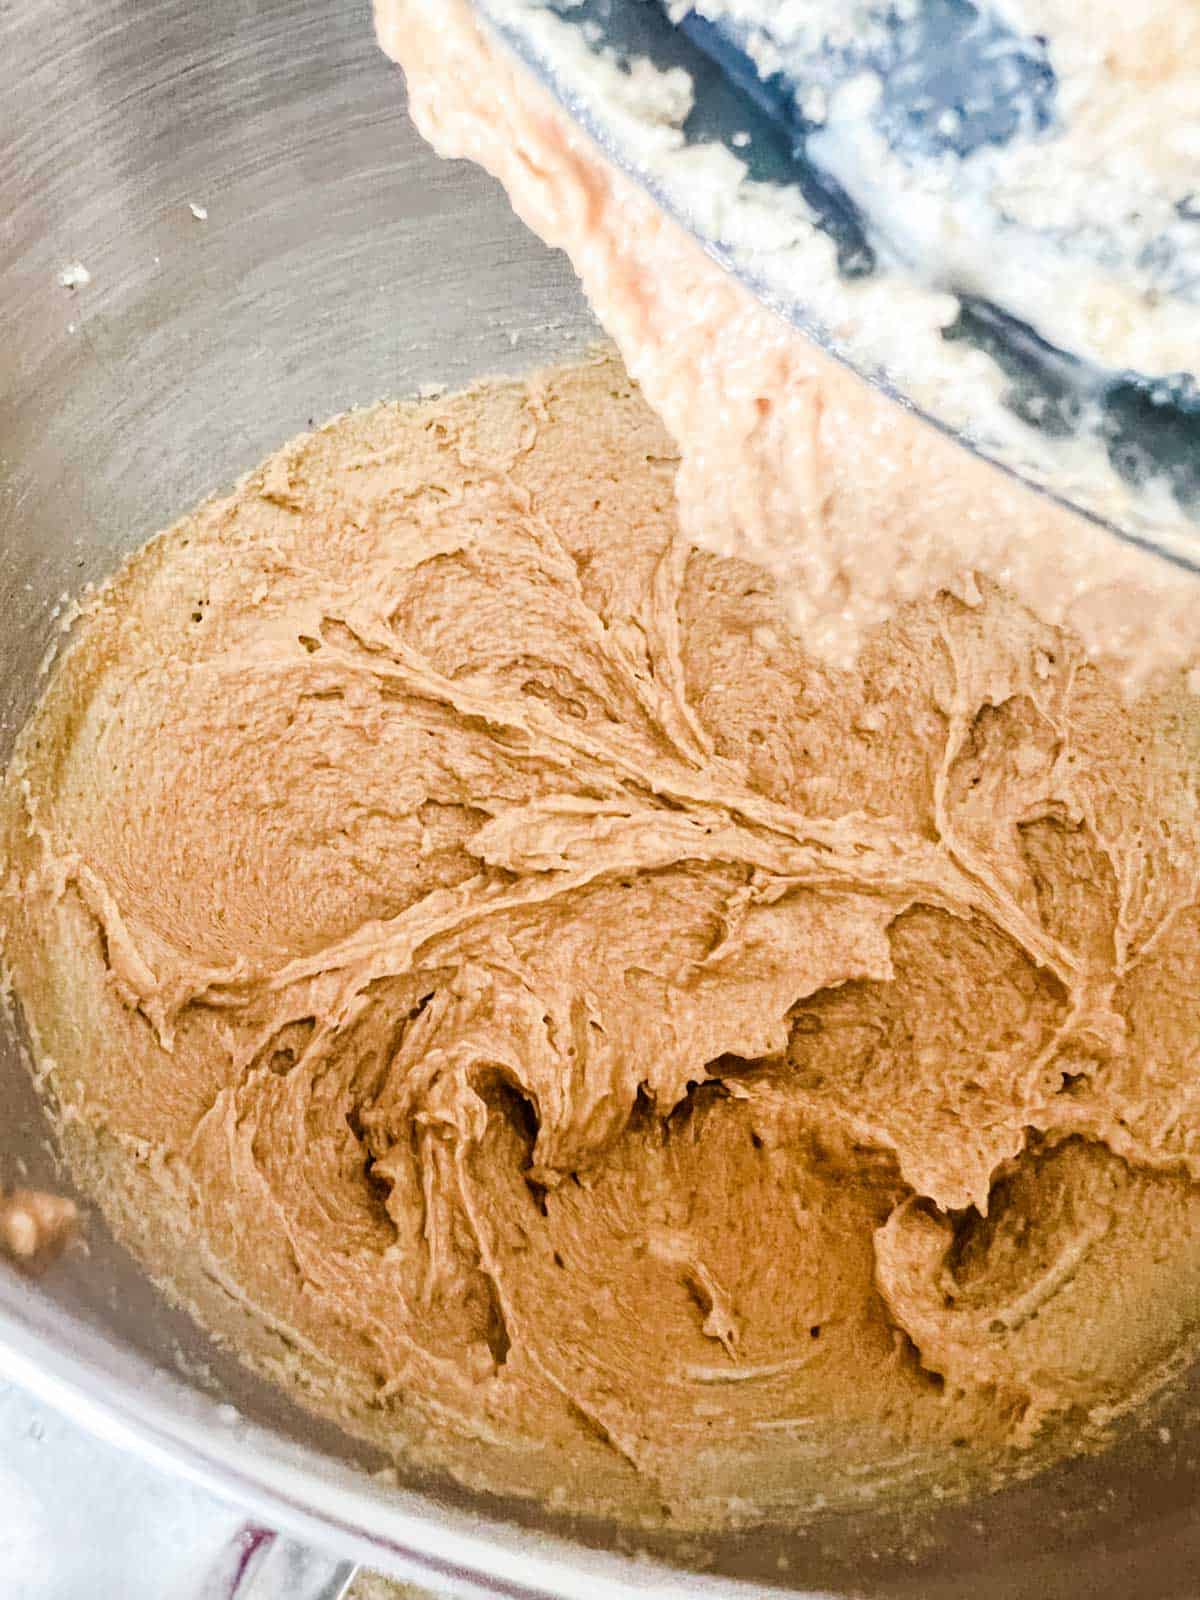 Peanut butter cookie dough being made in the bowl of a stand mixer.